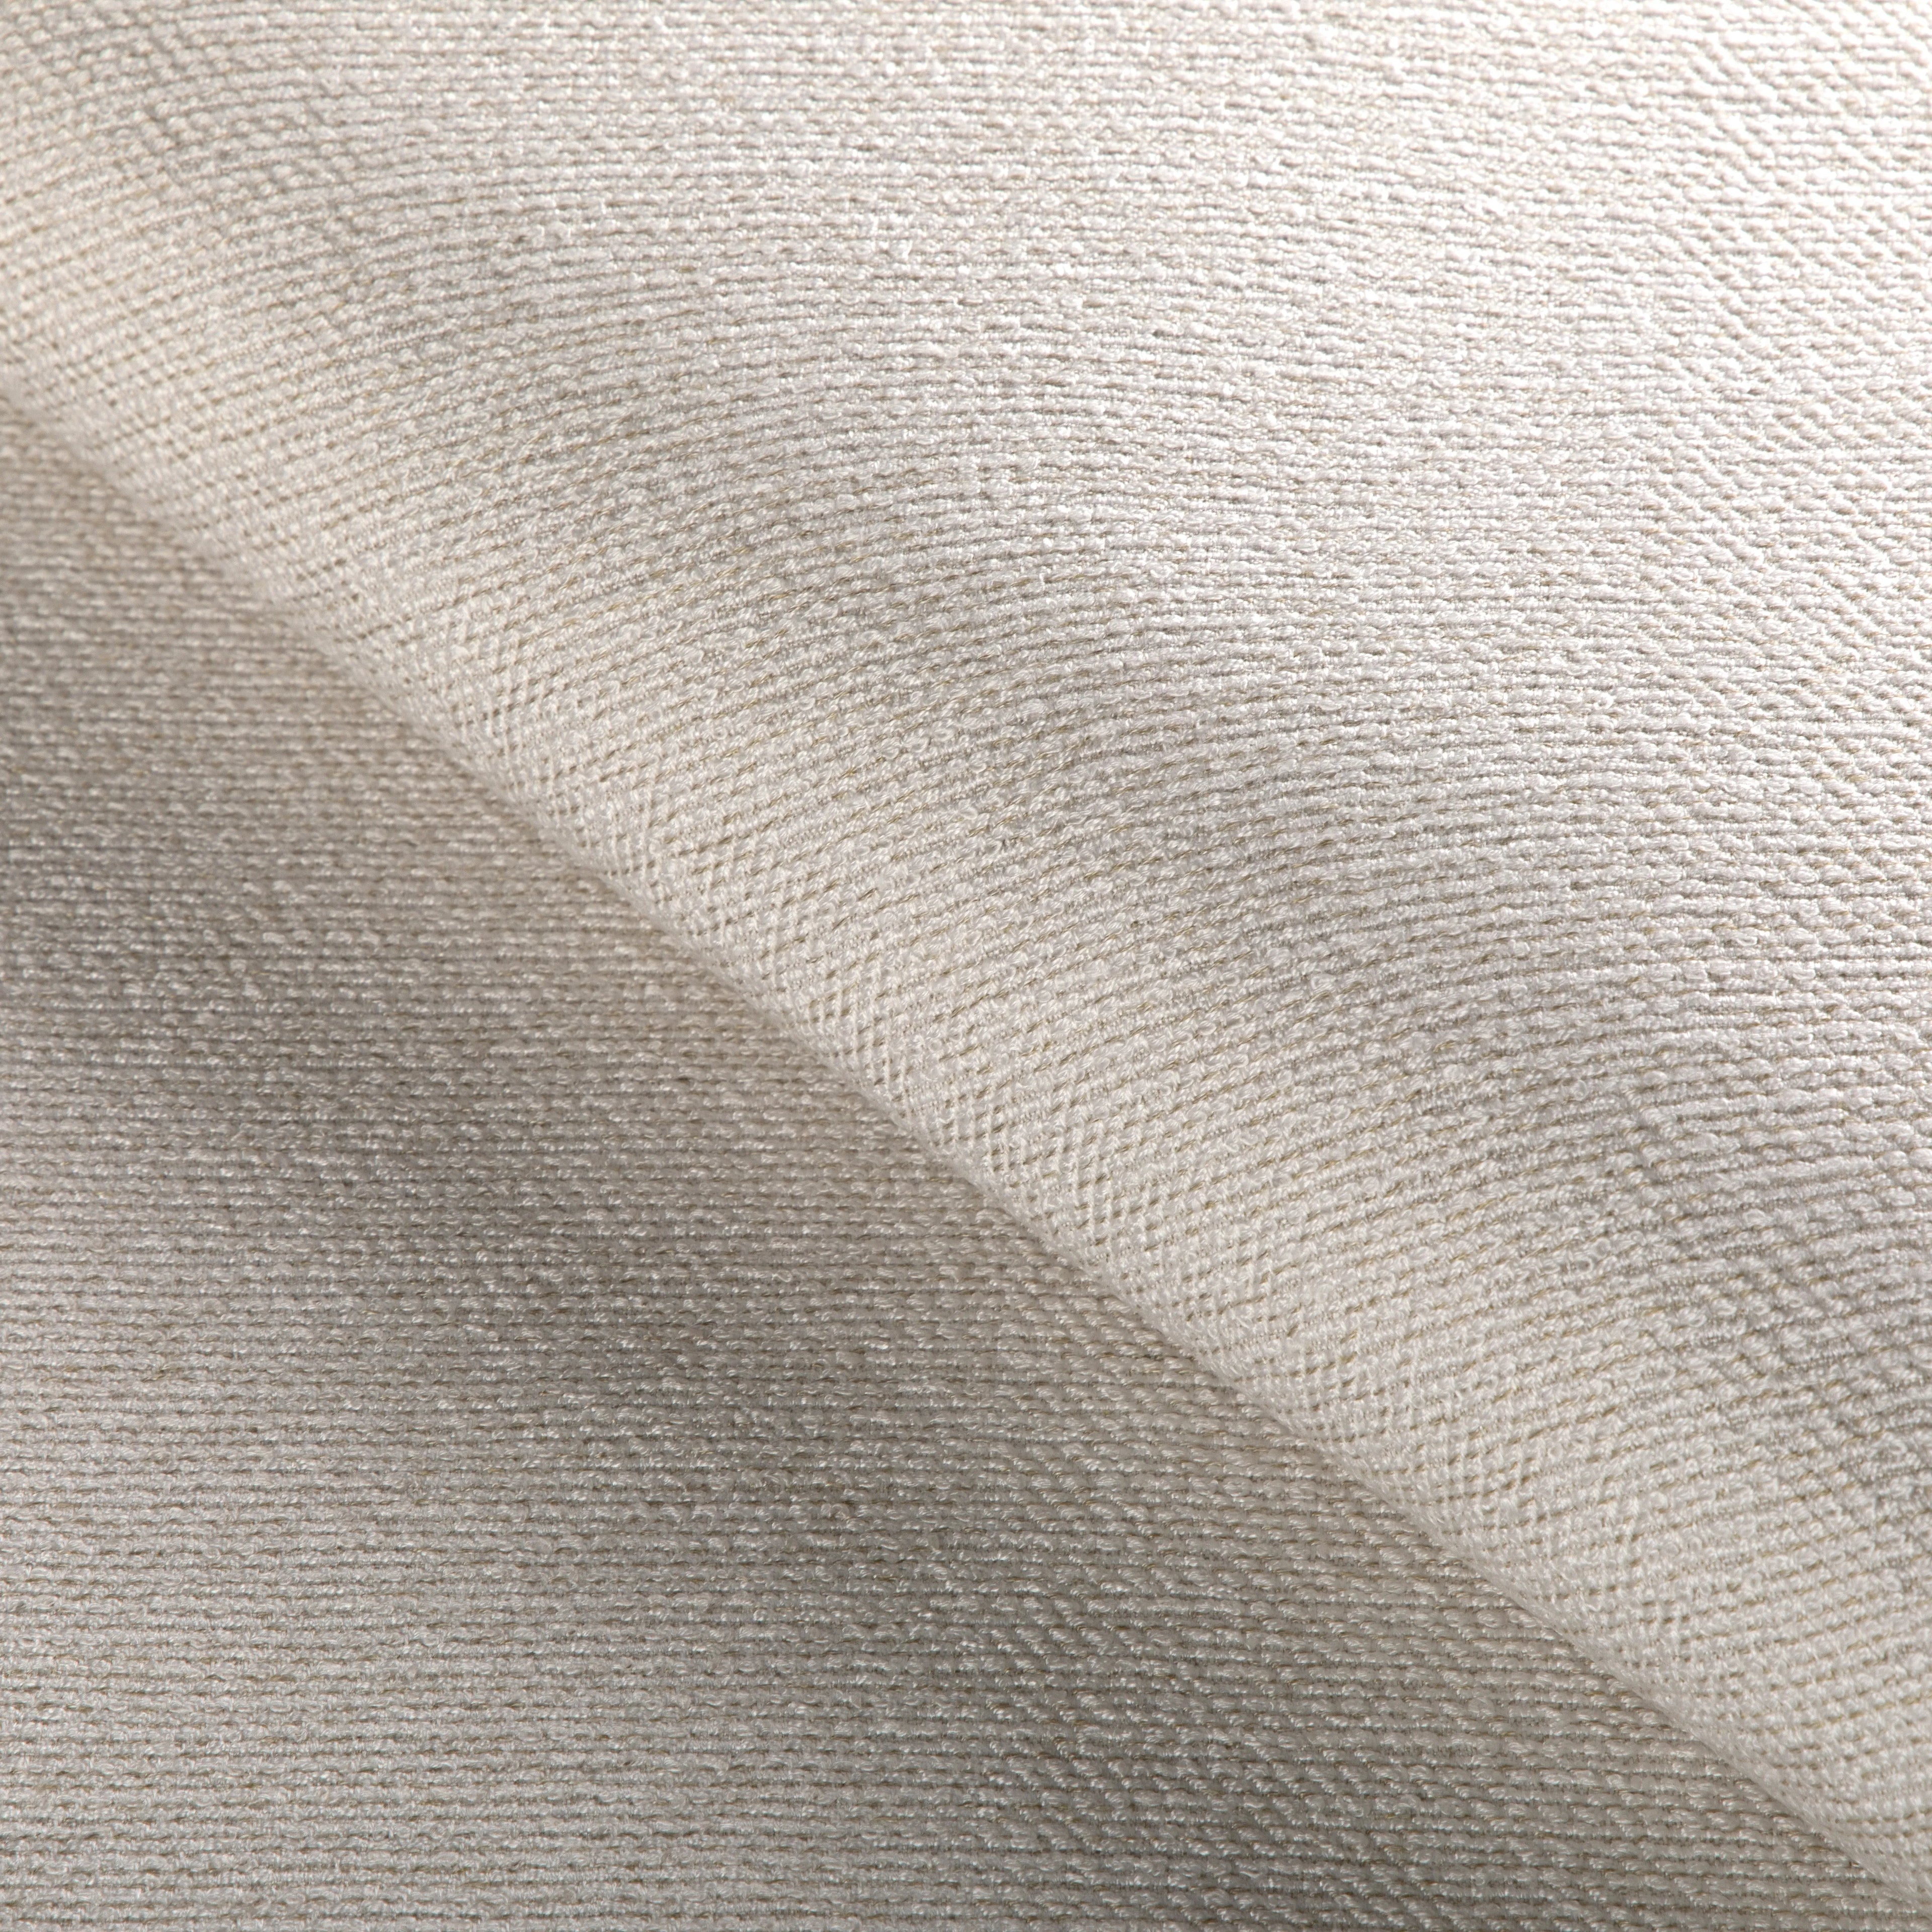 Alternate texture view of Chatham Texture fabric in sand color - pattern 36935.116.0 - by Kravet Couture in the Riviera collection